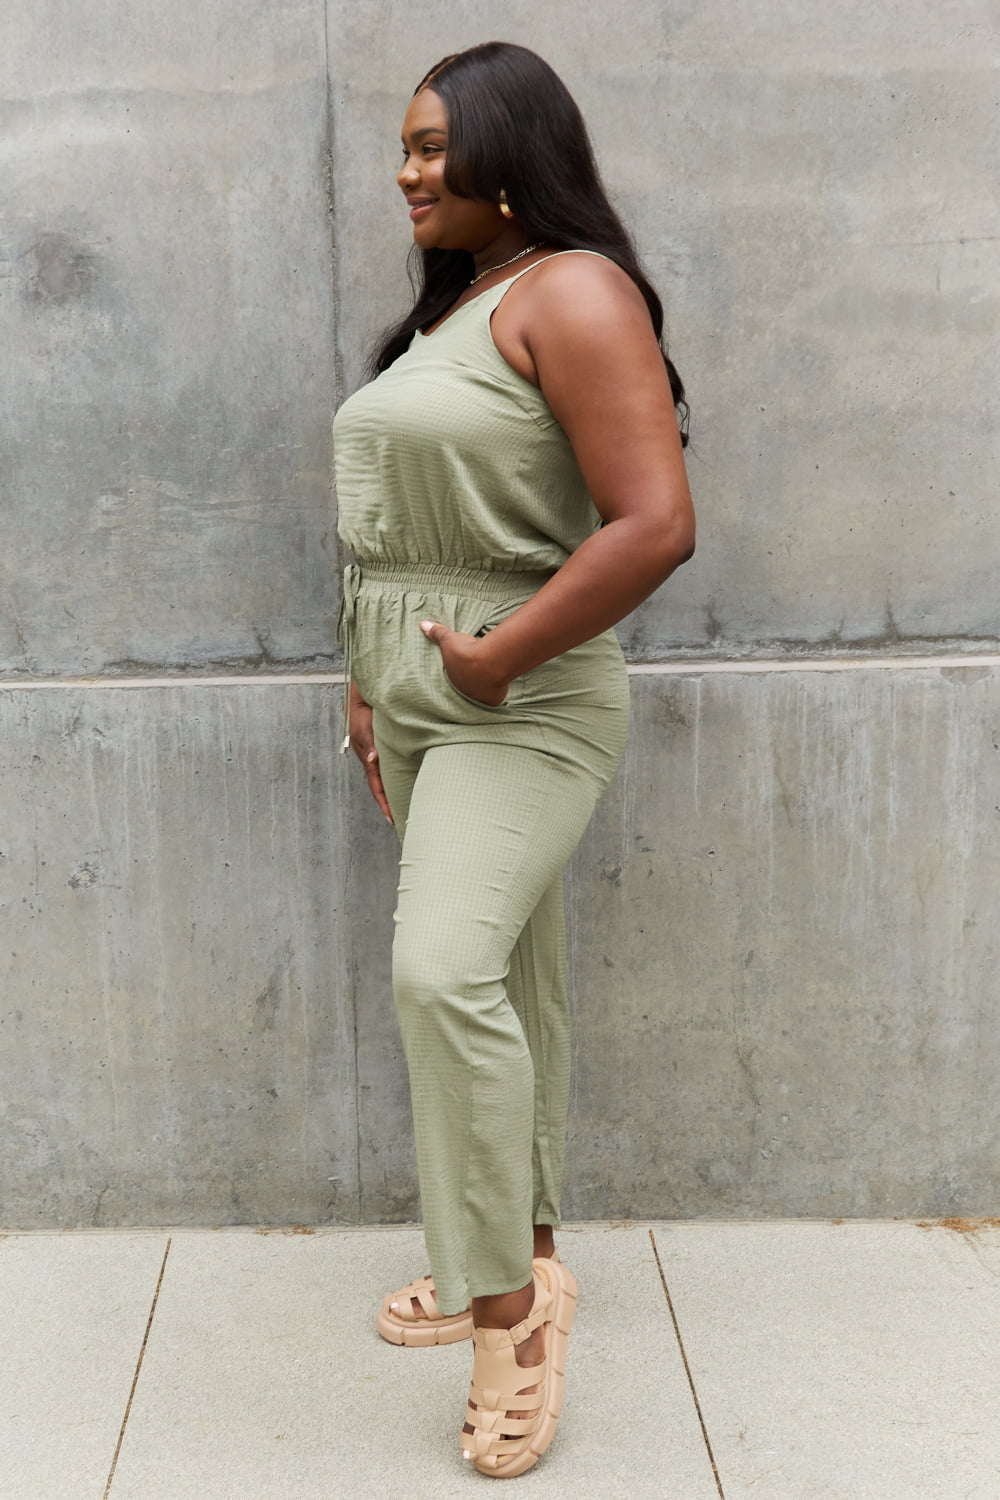 ODDI Textured Woven Jumpsuit in Sage - Online Only